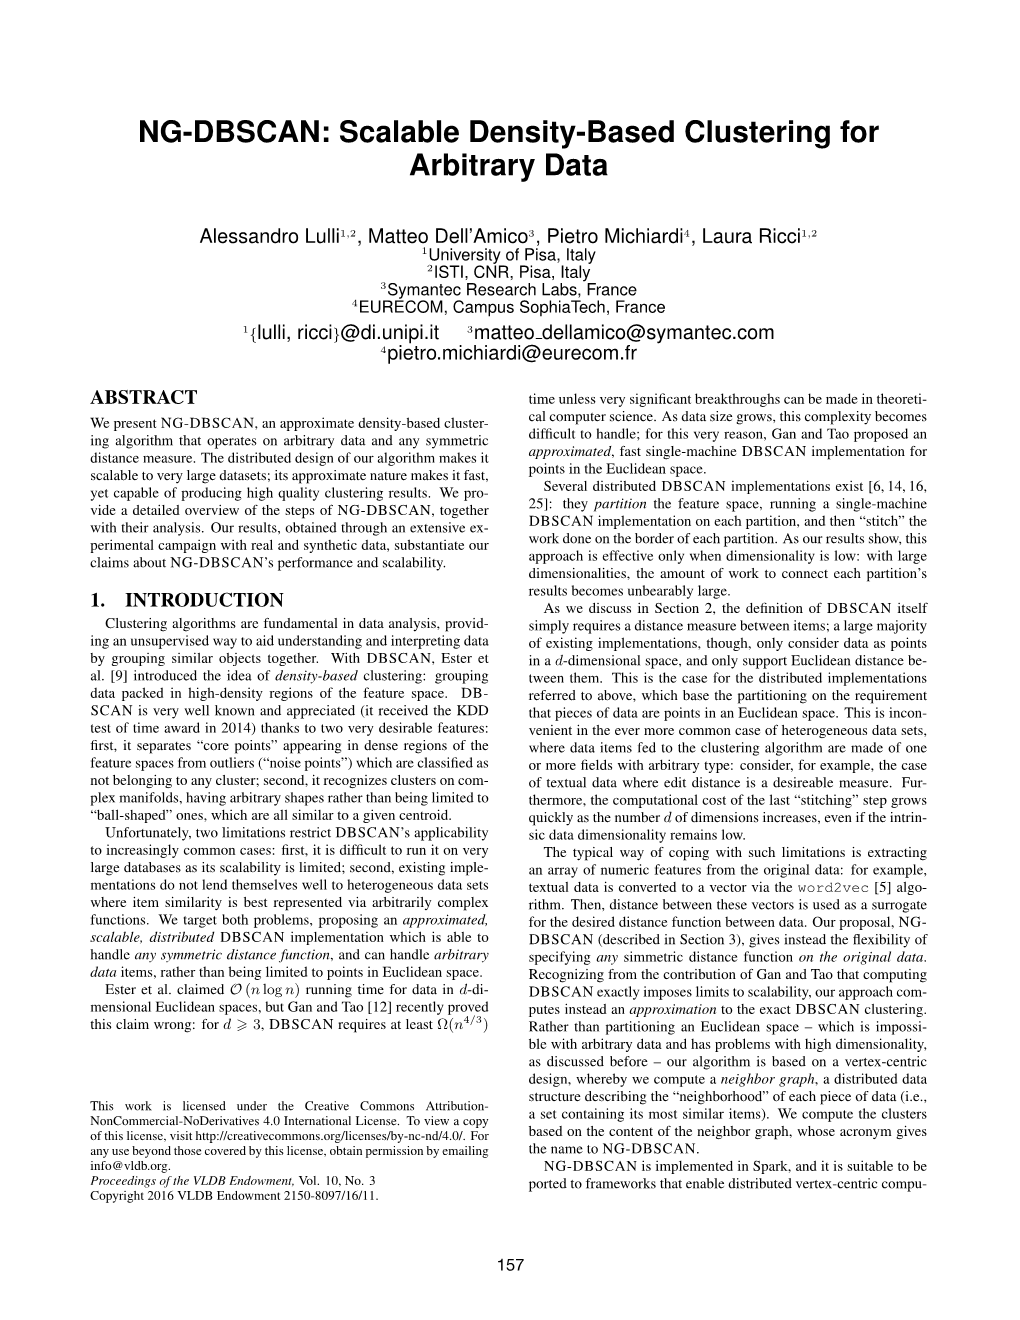 NG-DBSCAN: Scalable Density-Based Clustering for Arbitrary Data